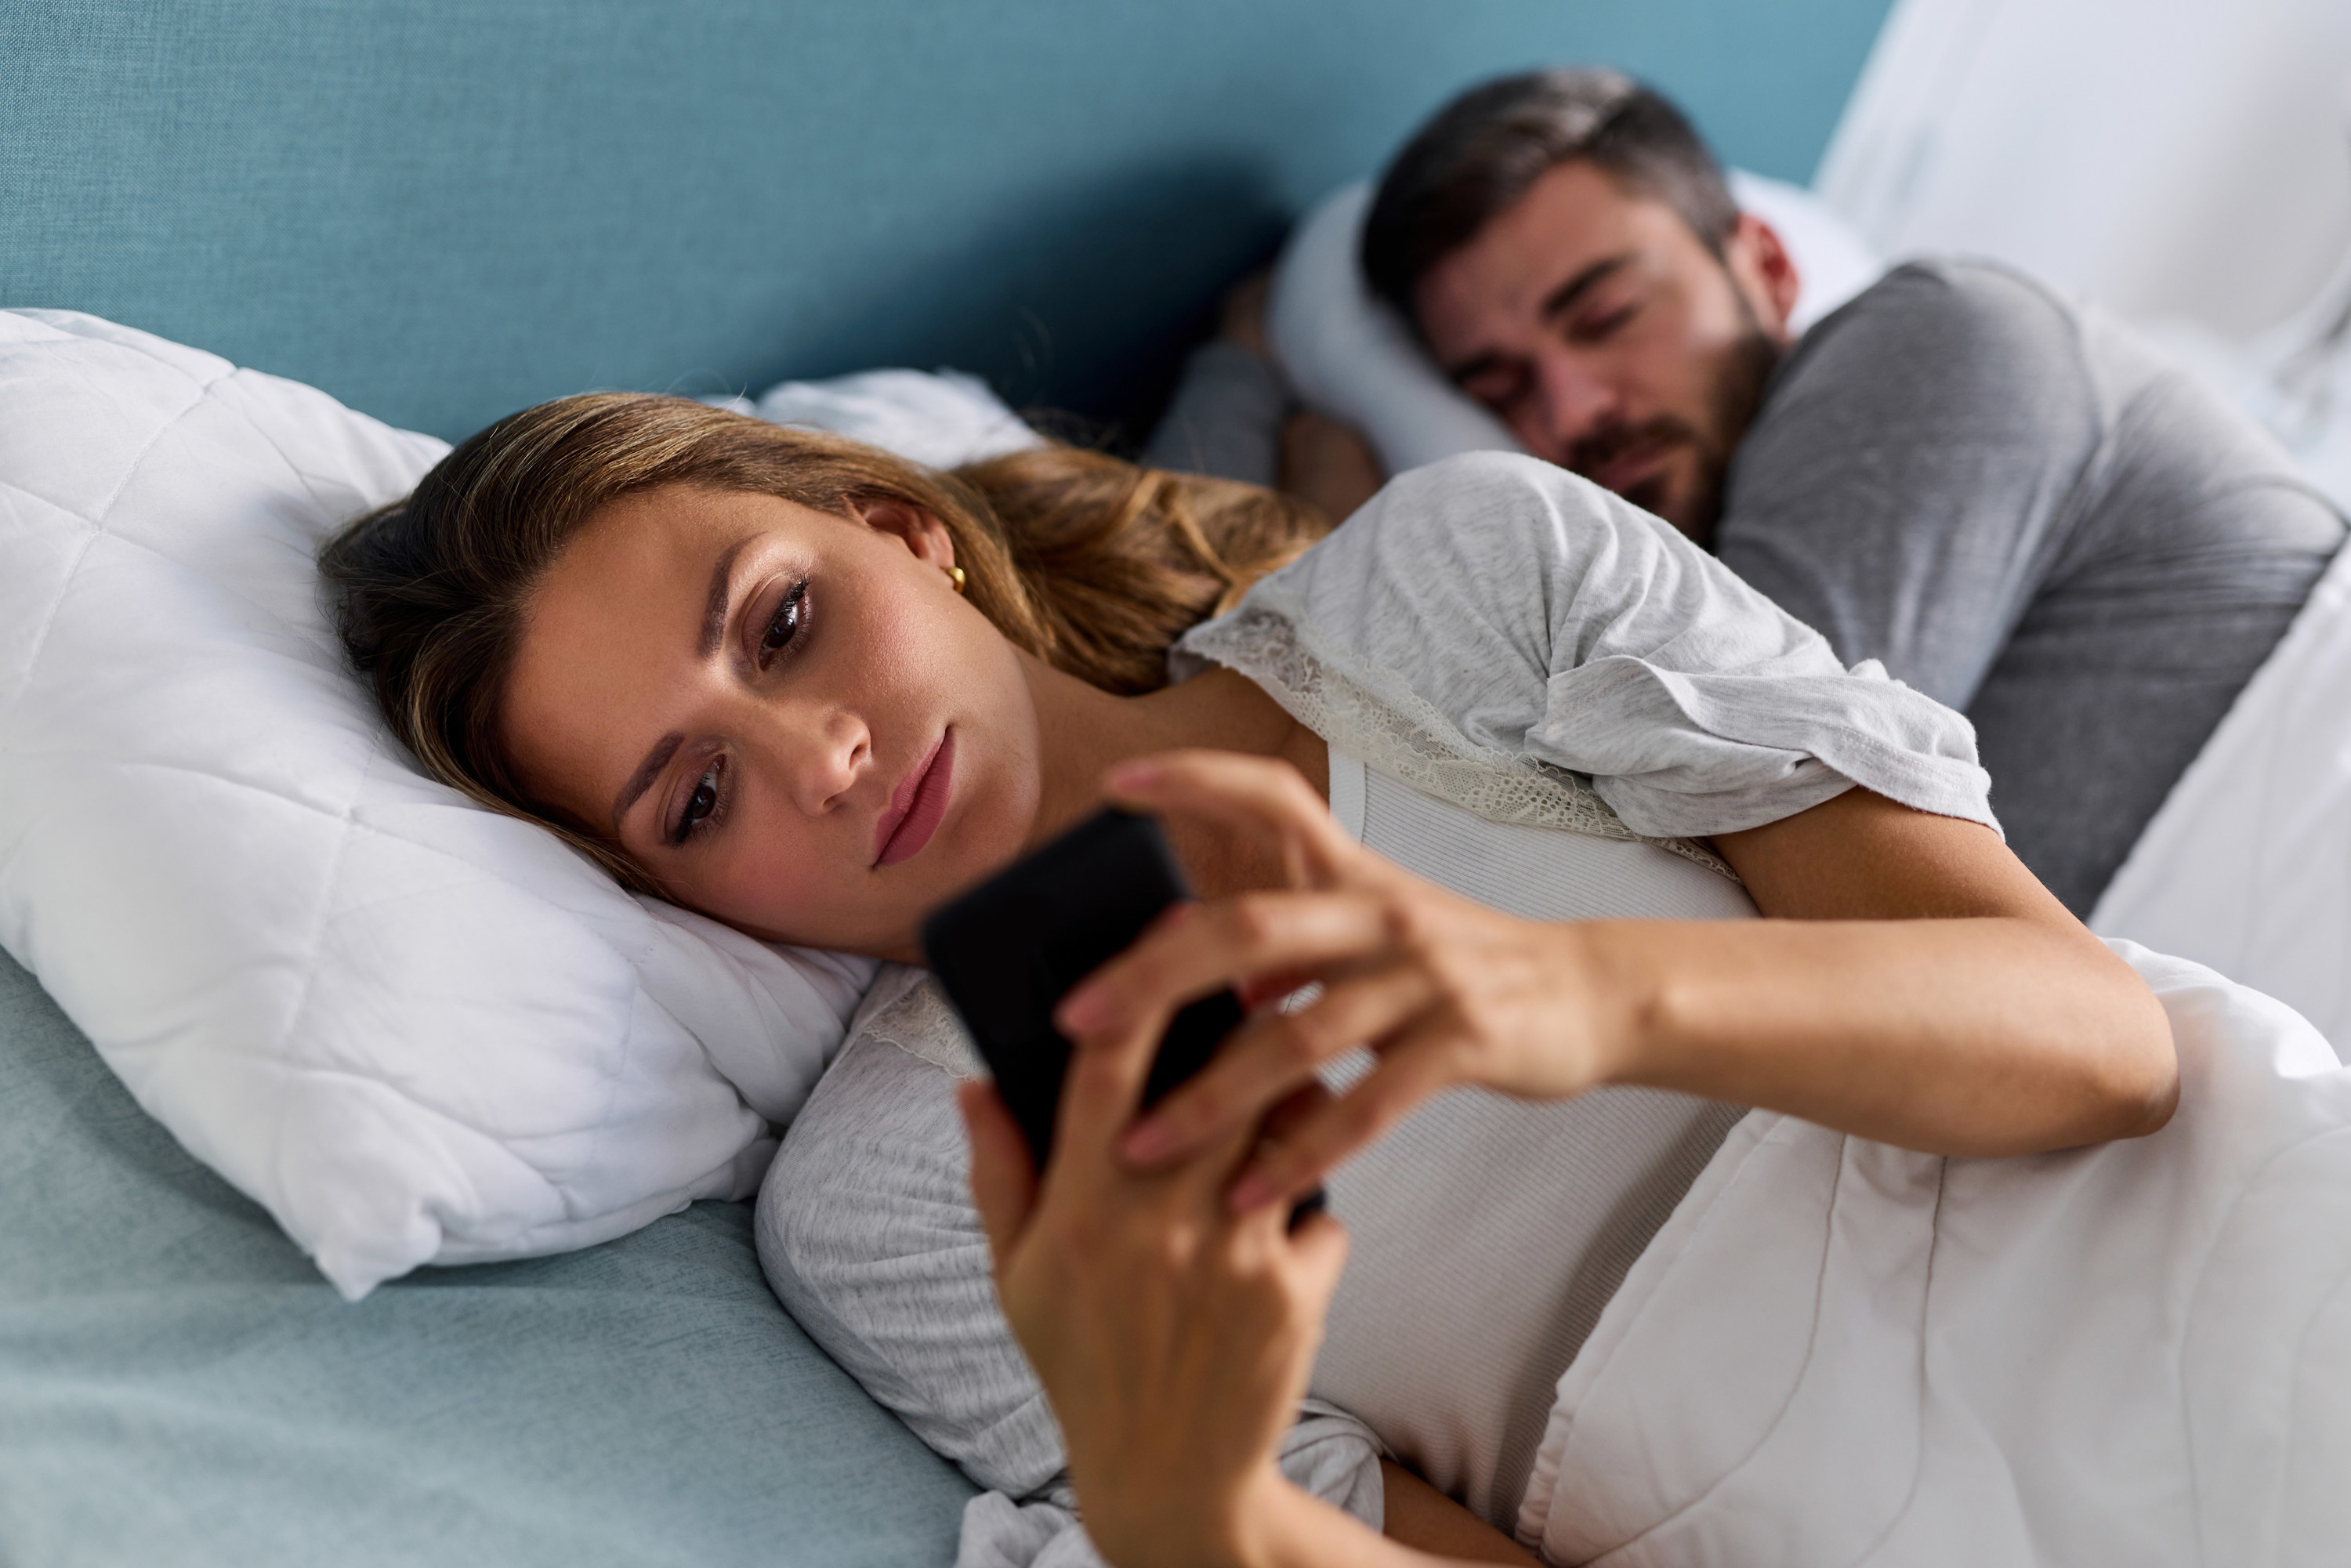 A woman with her back to her partner in bed while on the phone